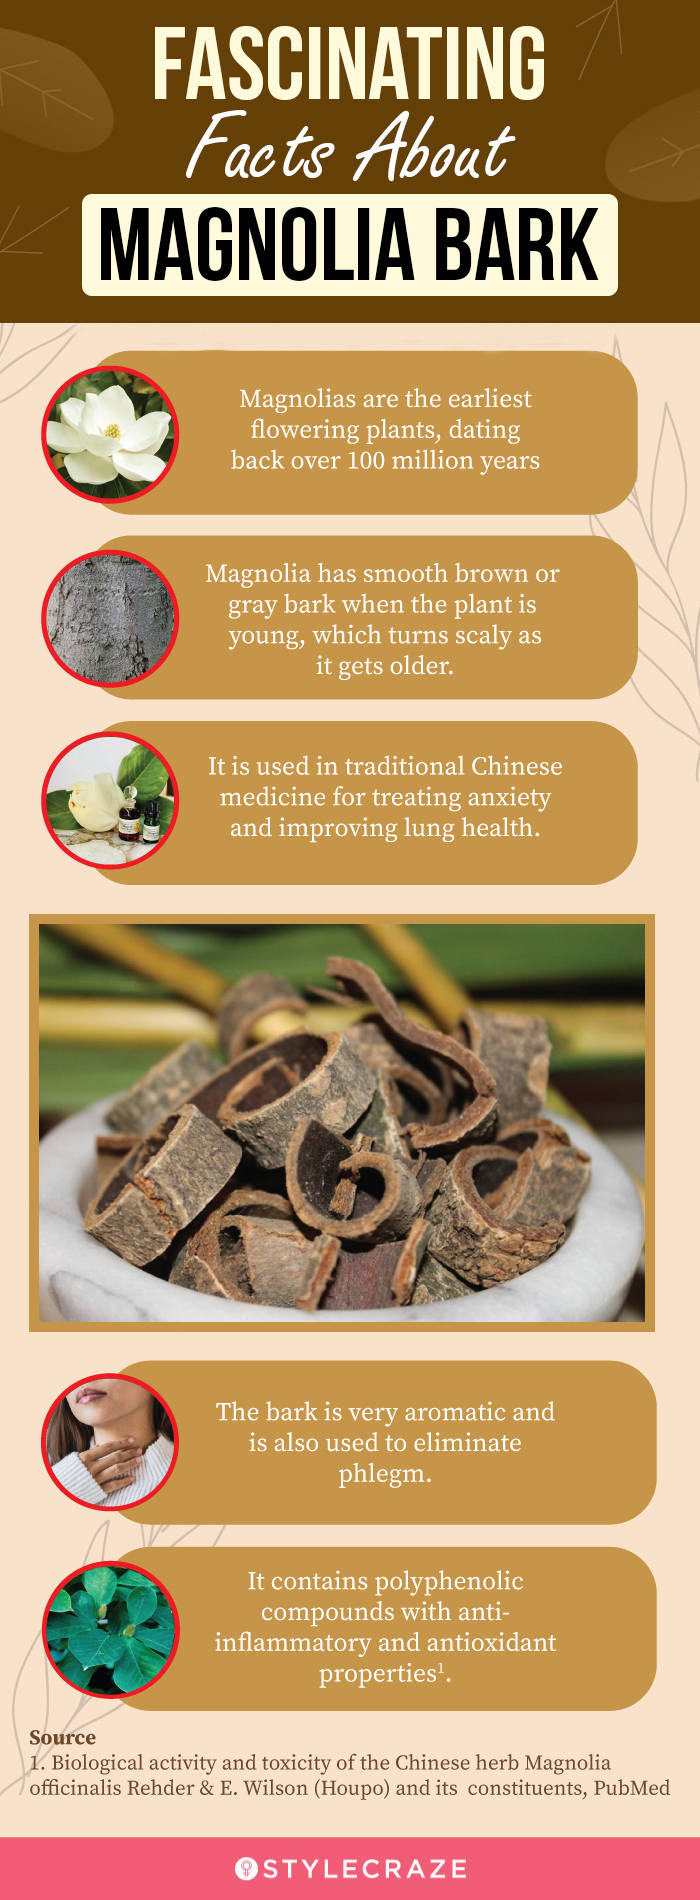 some fascinating facts about magnolia bark [infographic]